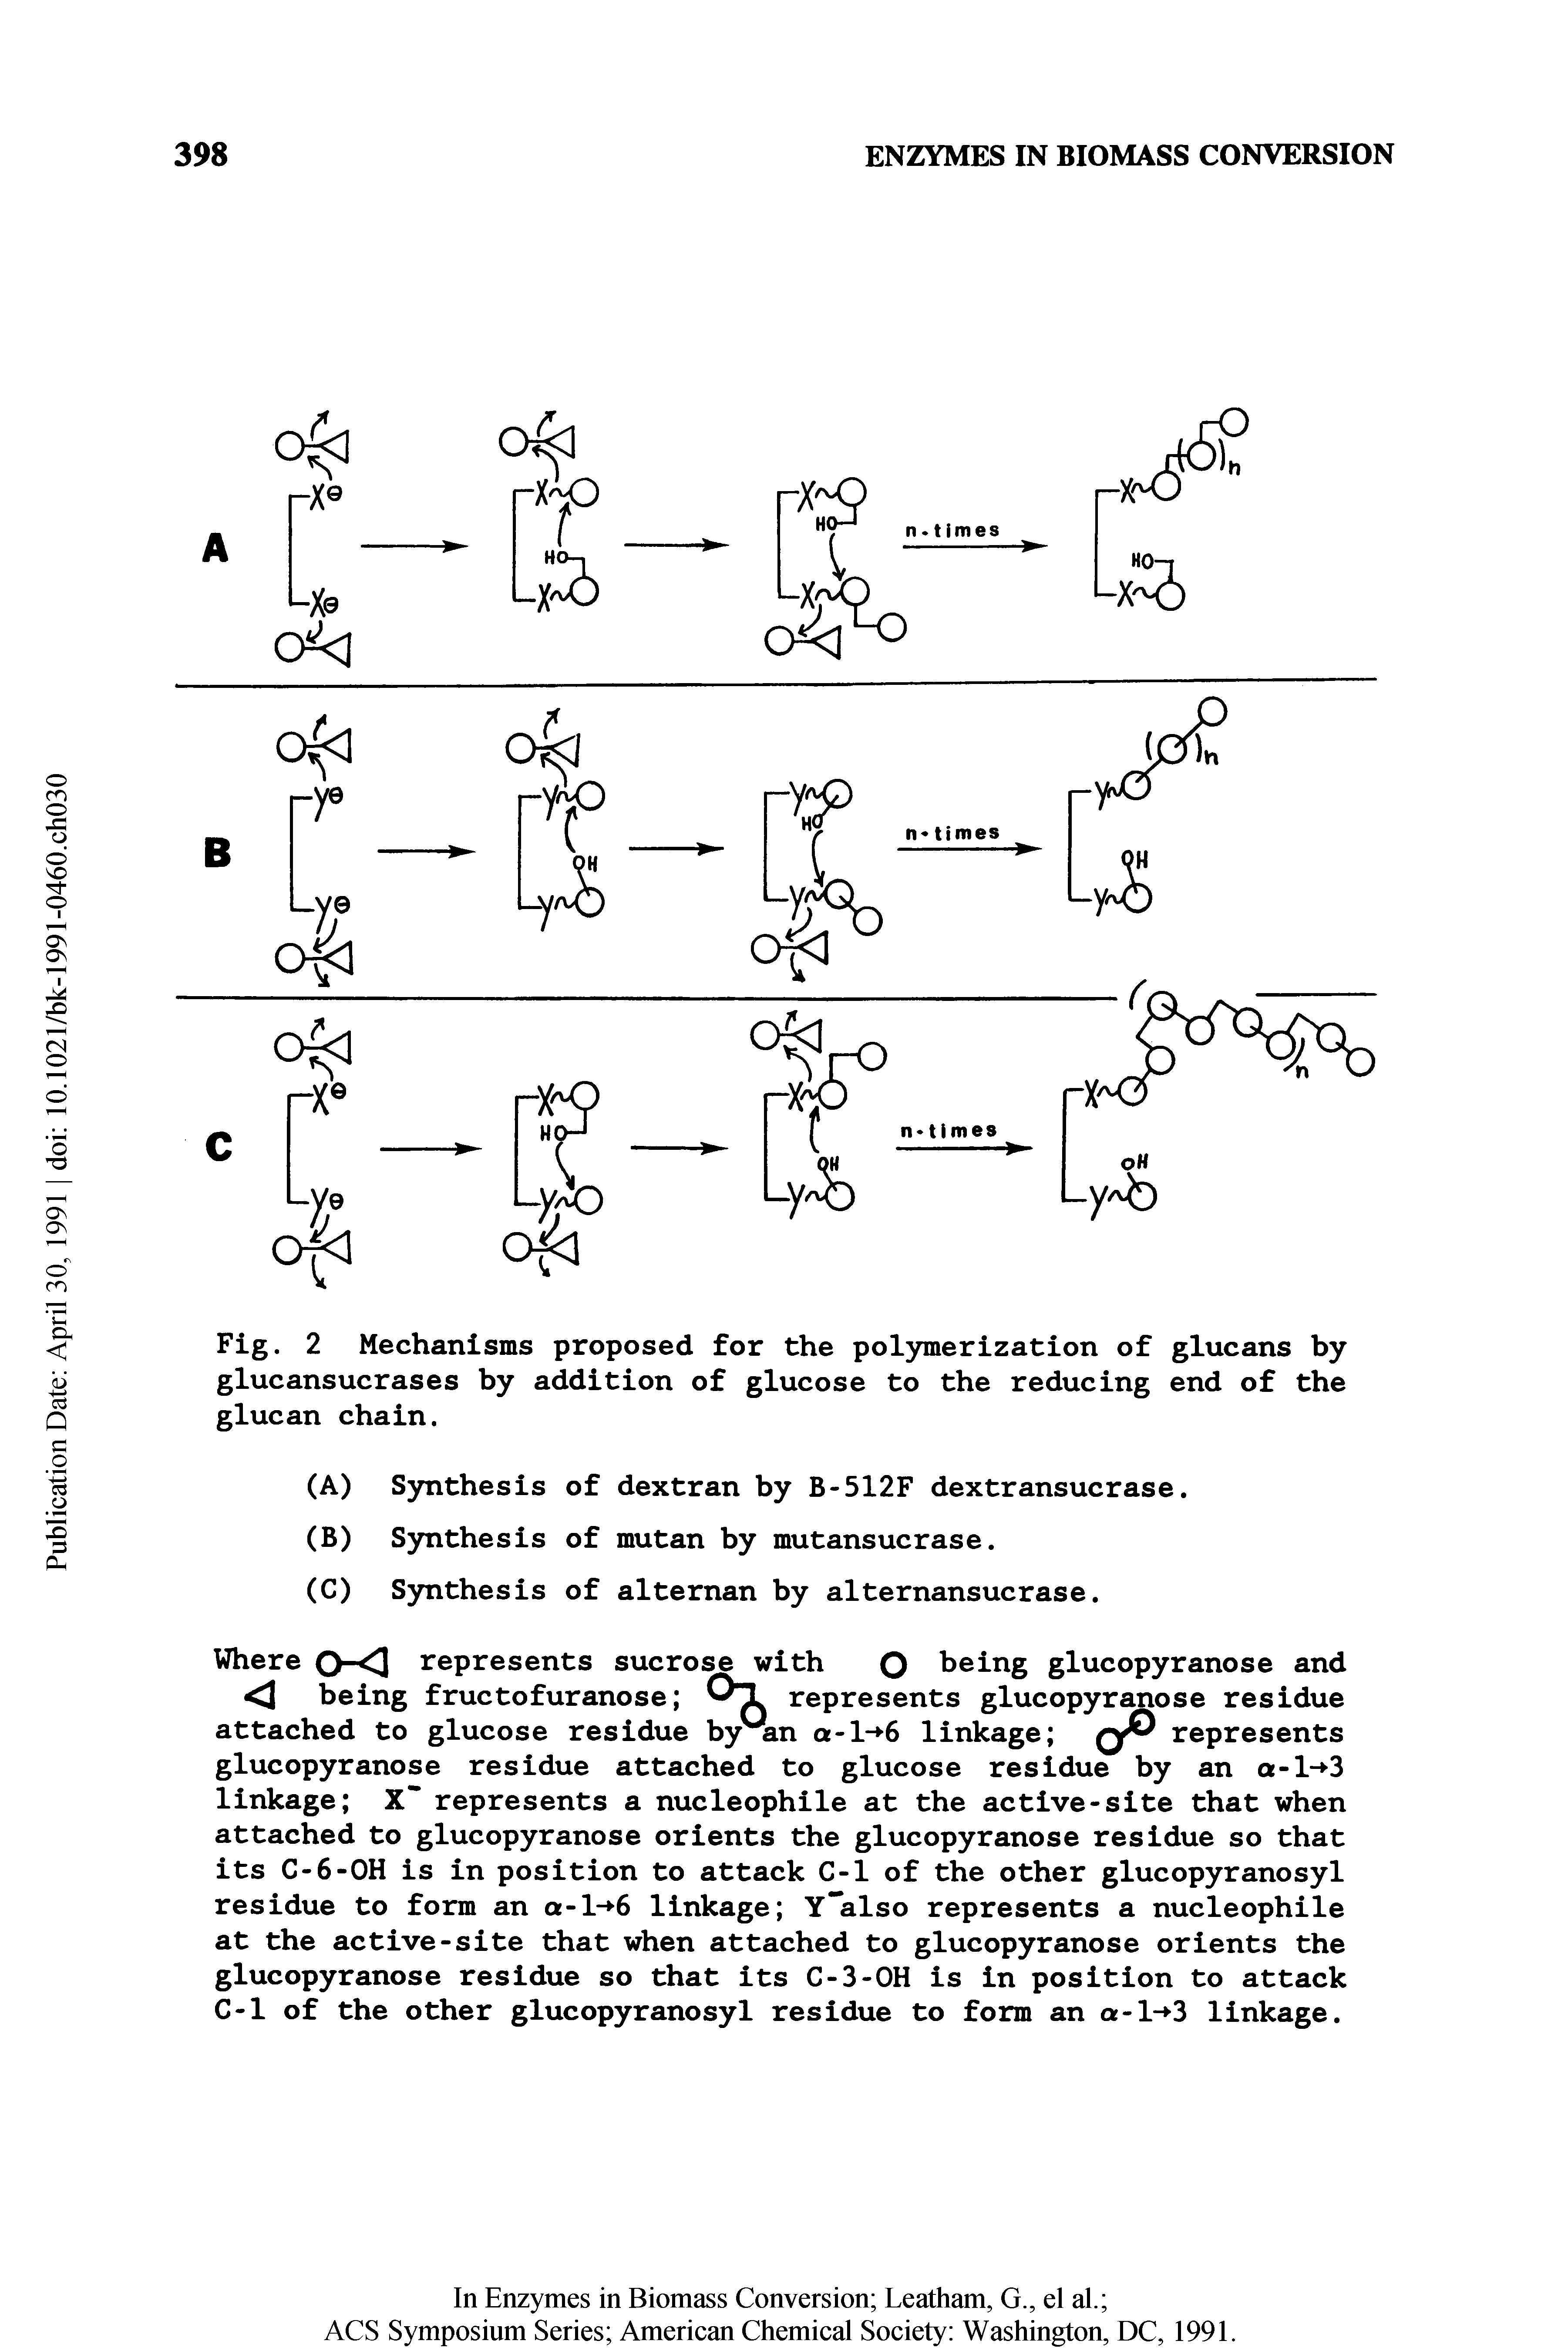 Fig. 2 Mechanisms proposed for the pol3no[ierization of glucans by glucansucrases by addition of glucose to the reducing end of the glucan chain.